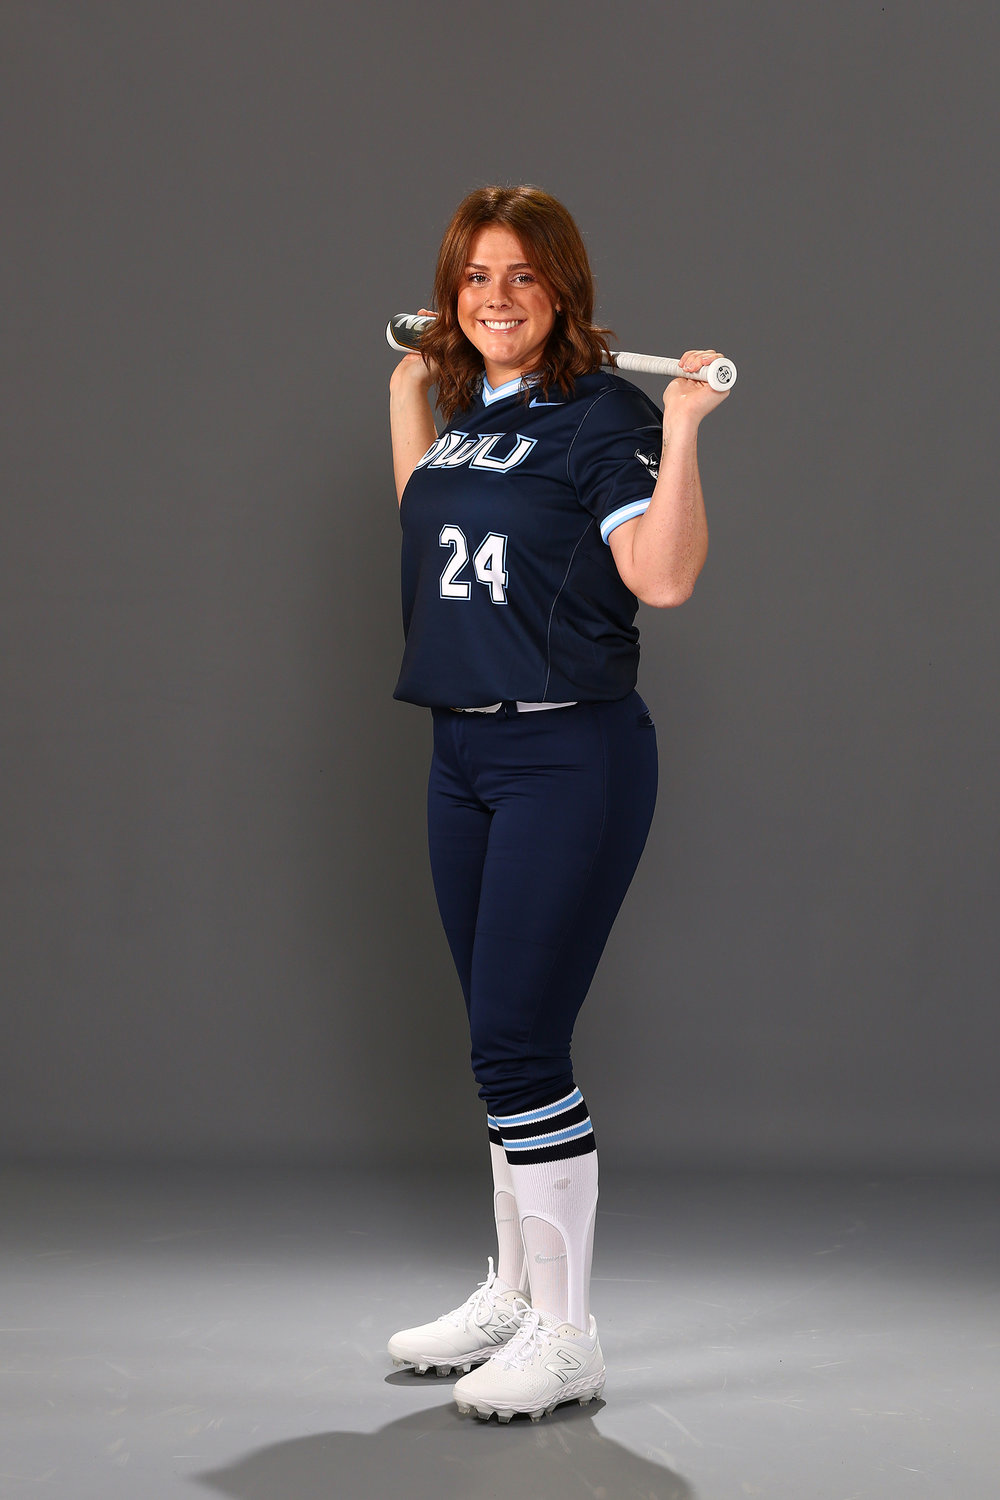 Pe Ell alumna Dakota Brooks, a junior at Western Washington University, appeared in all 22 games for the Vikings this spring as their starting first baseman.